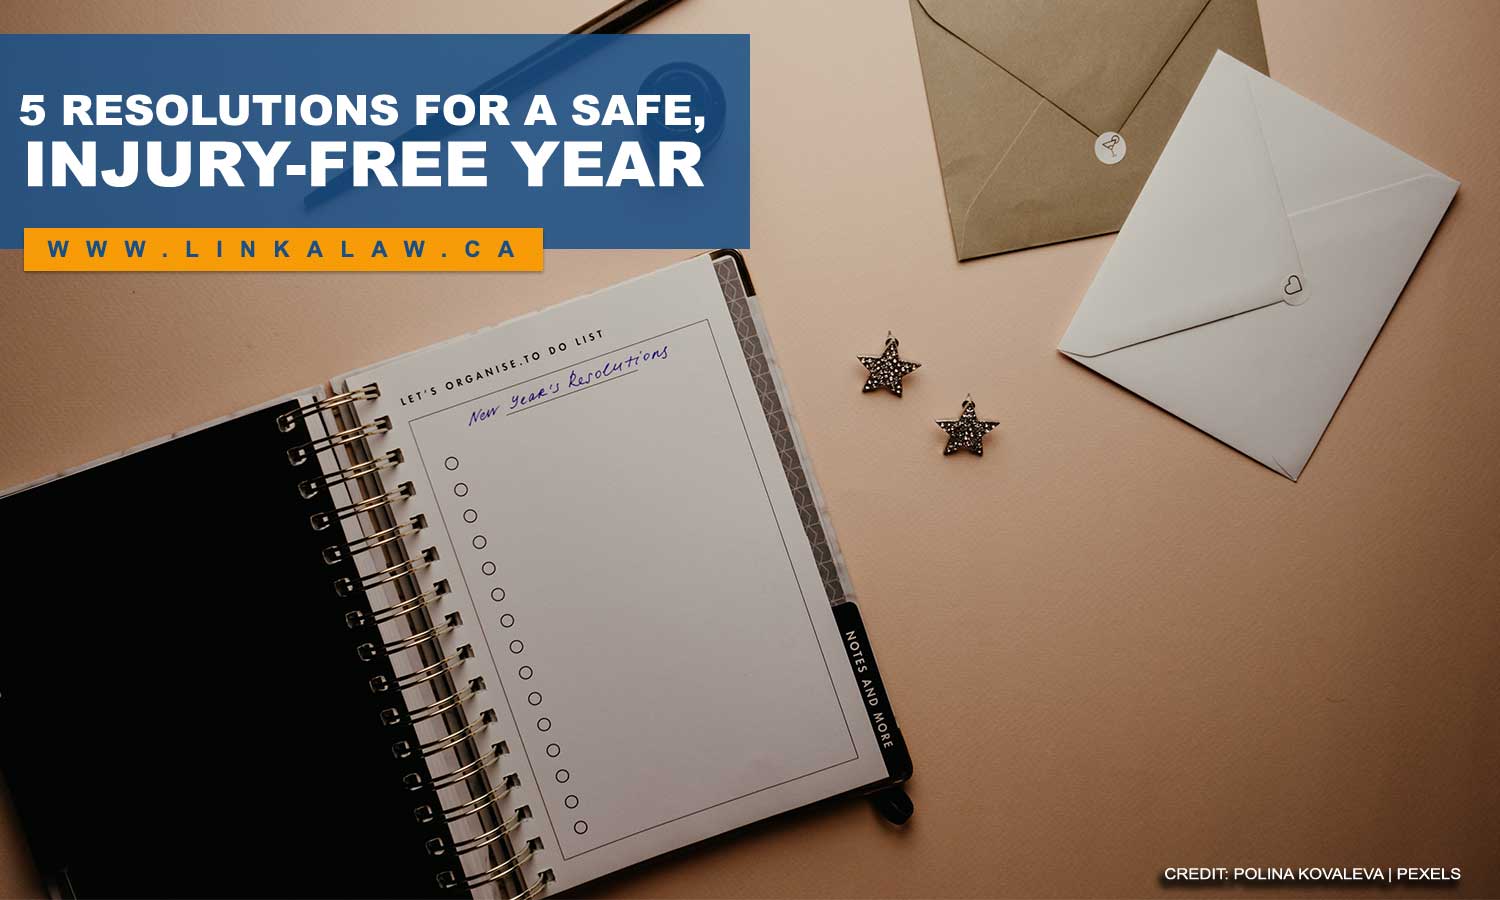 5 Resolutions for a Safe, Injury-Free Year